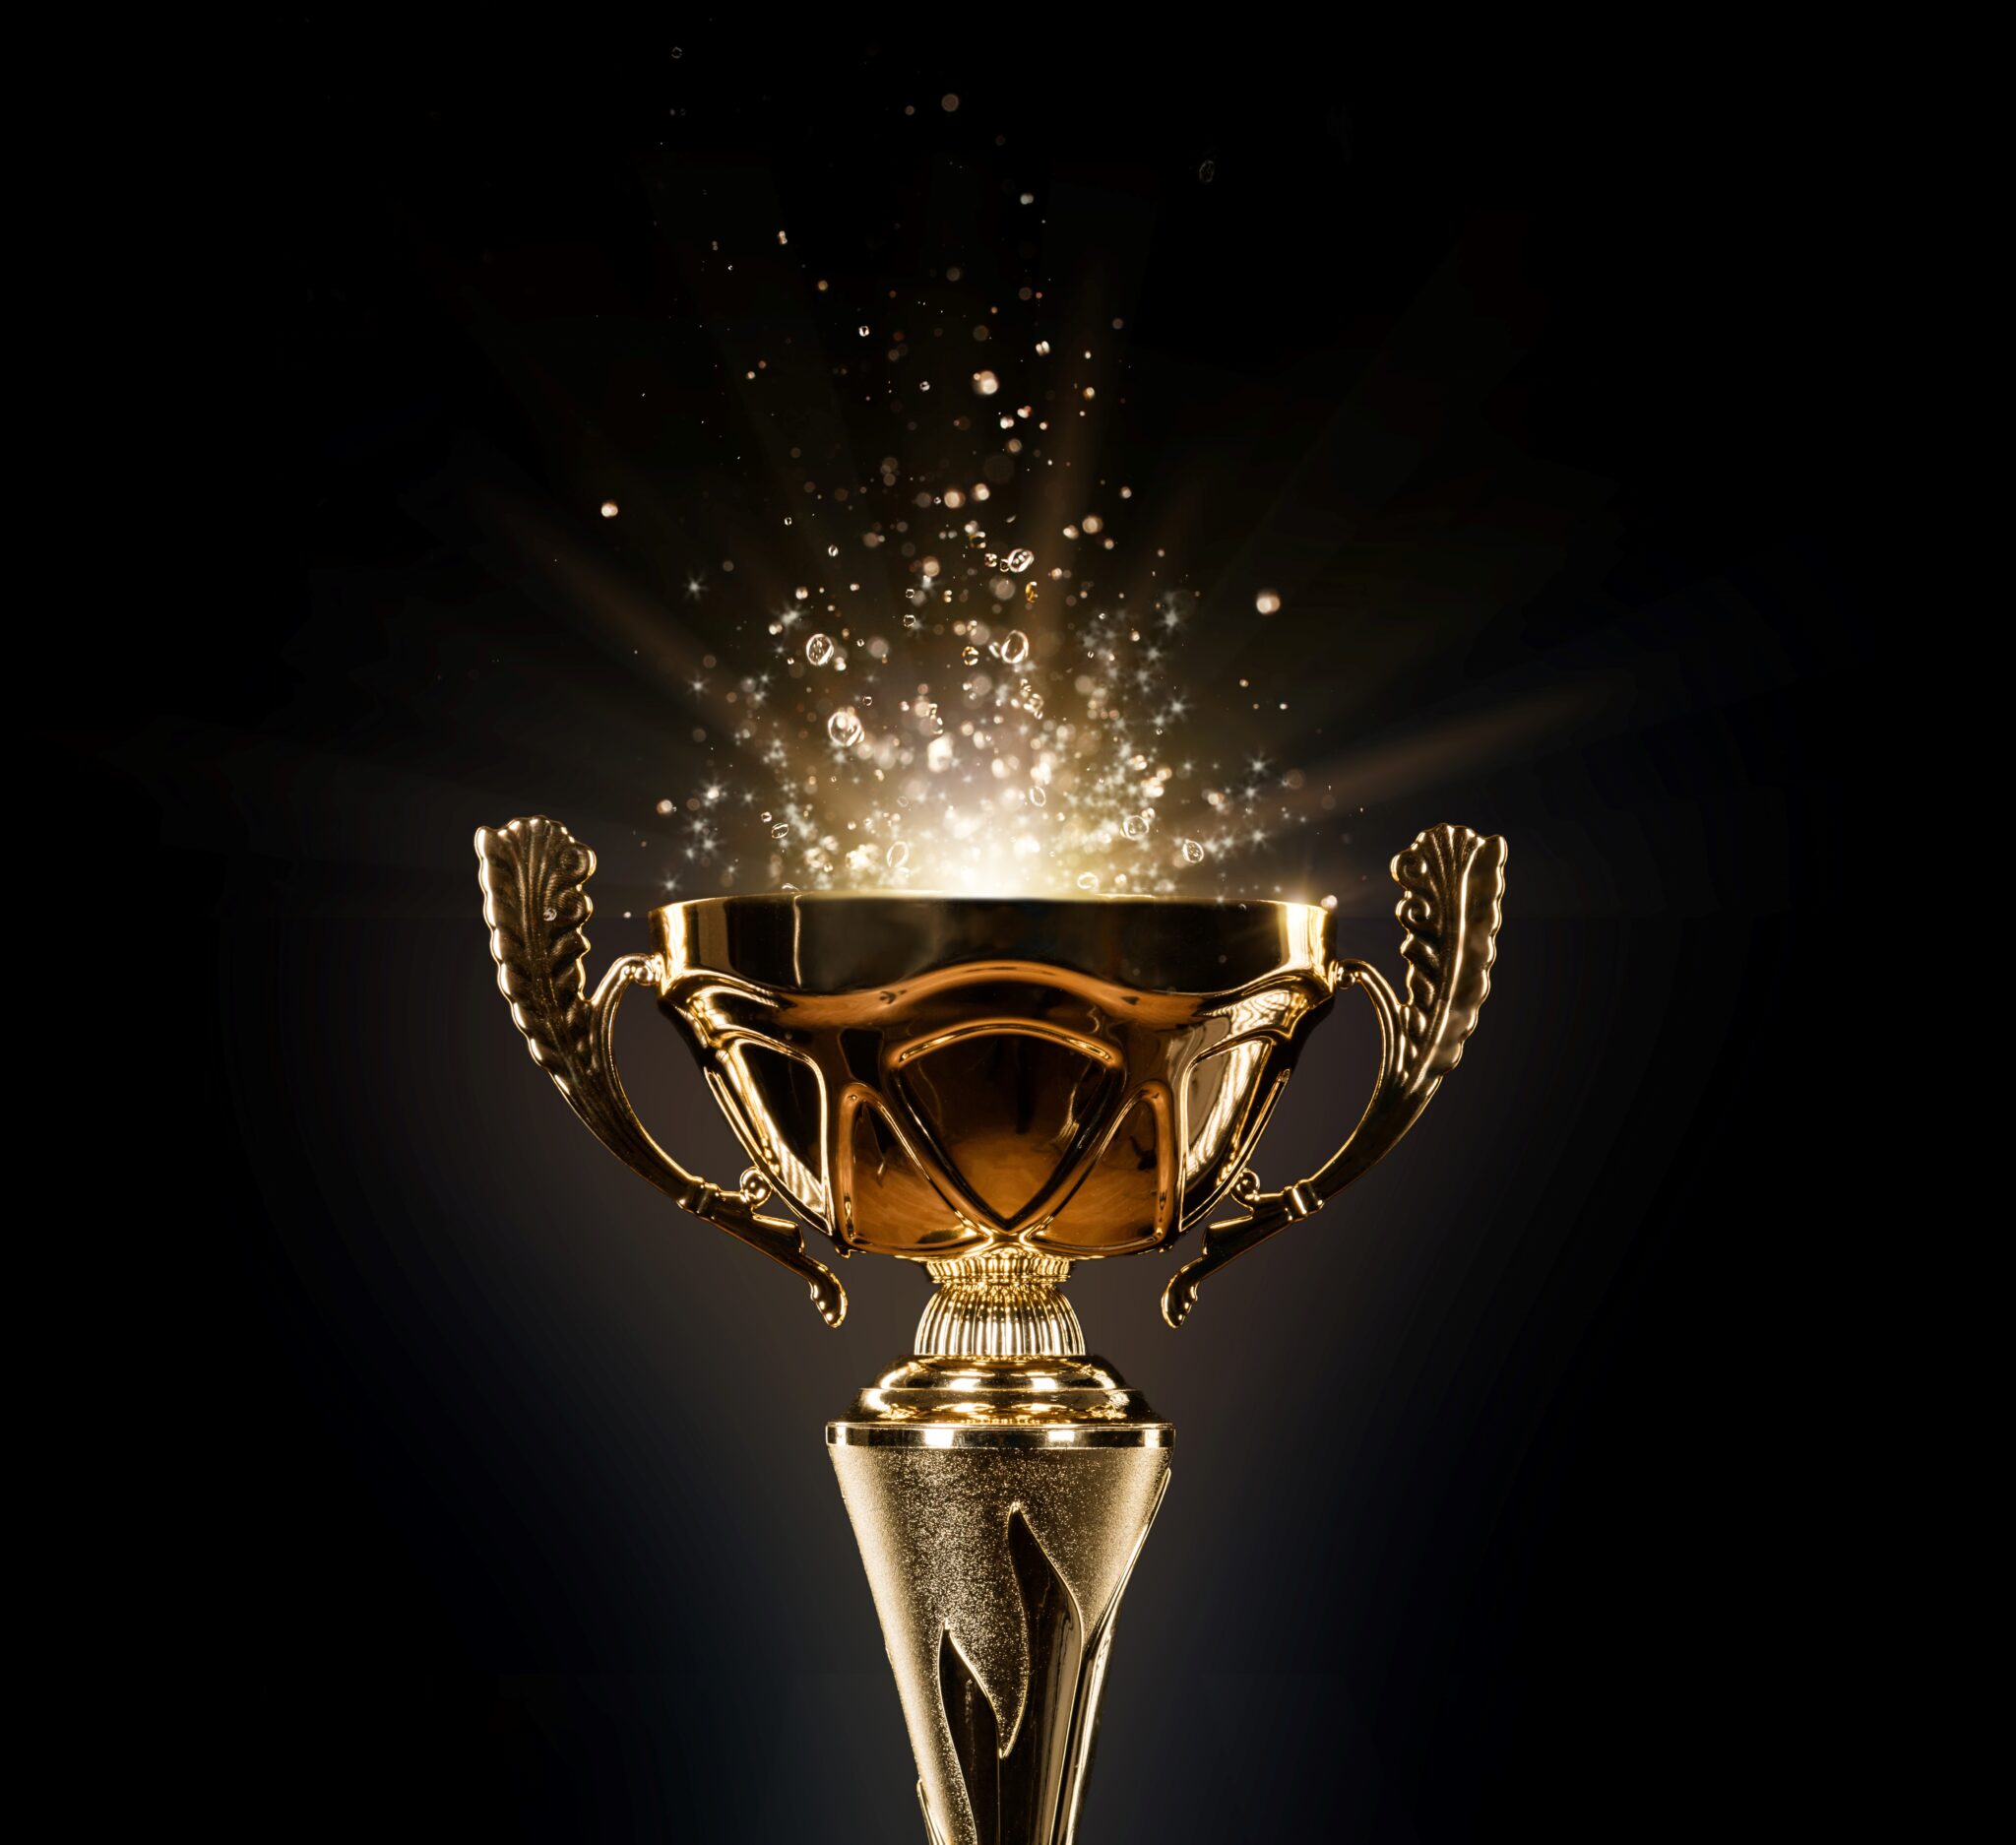 Announcing the award winners. Image of champion golden trophy on black background.